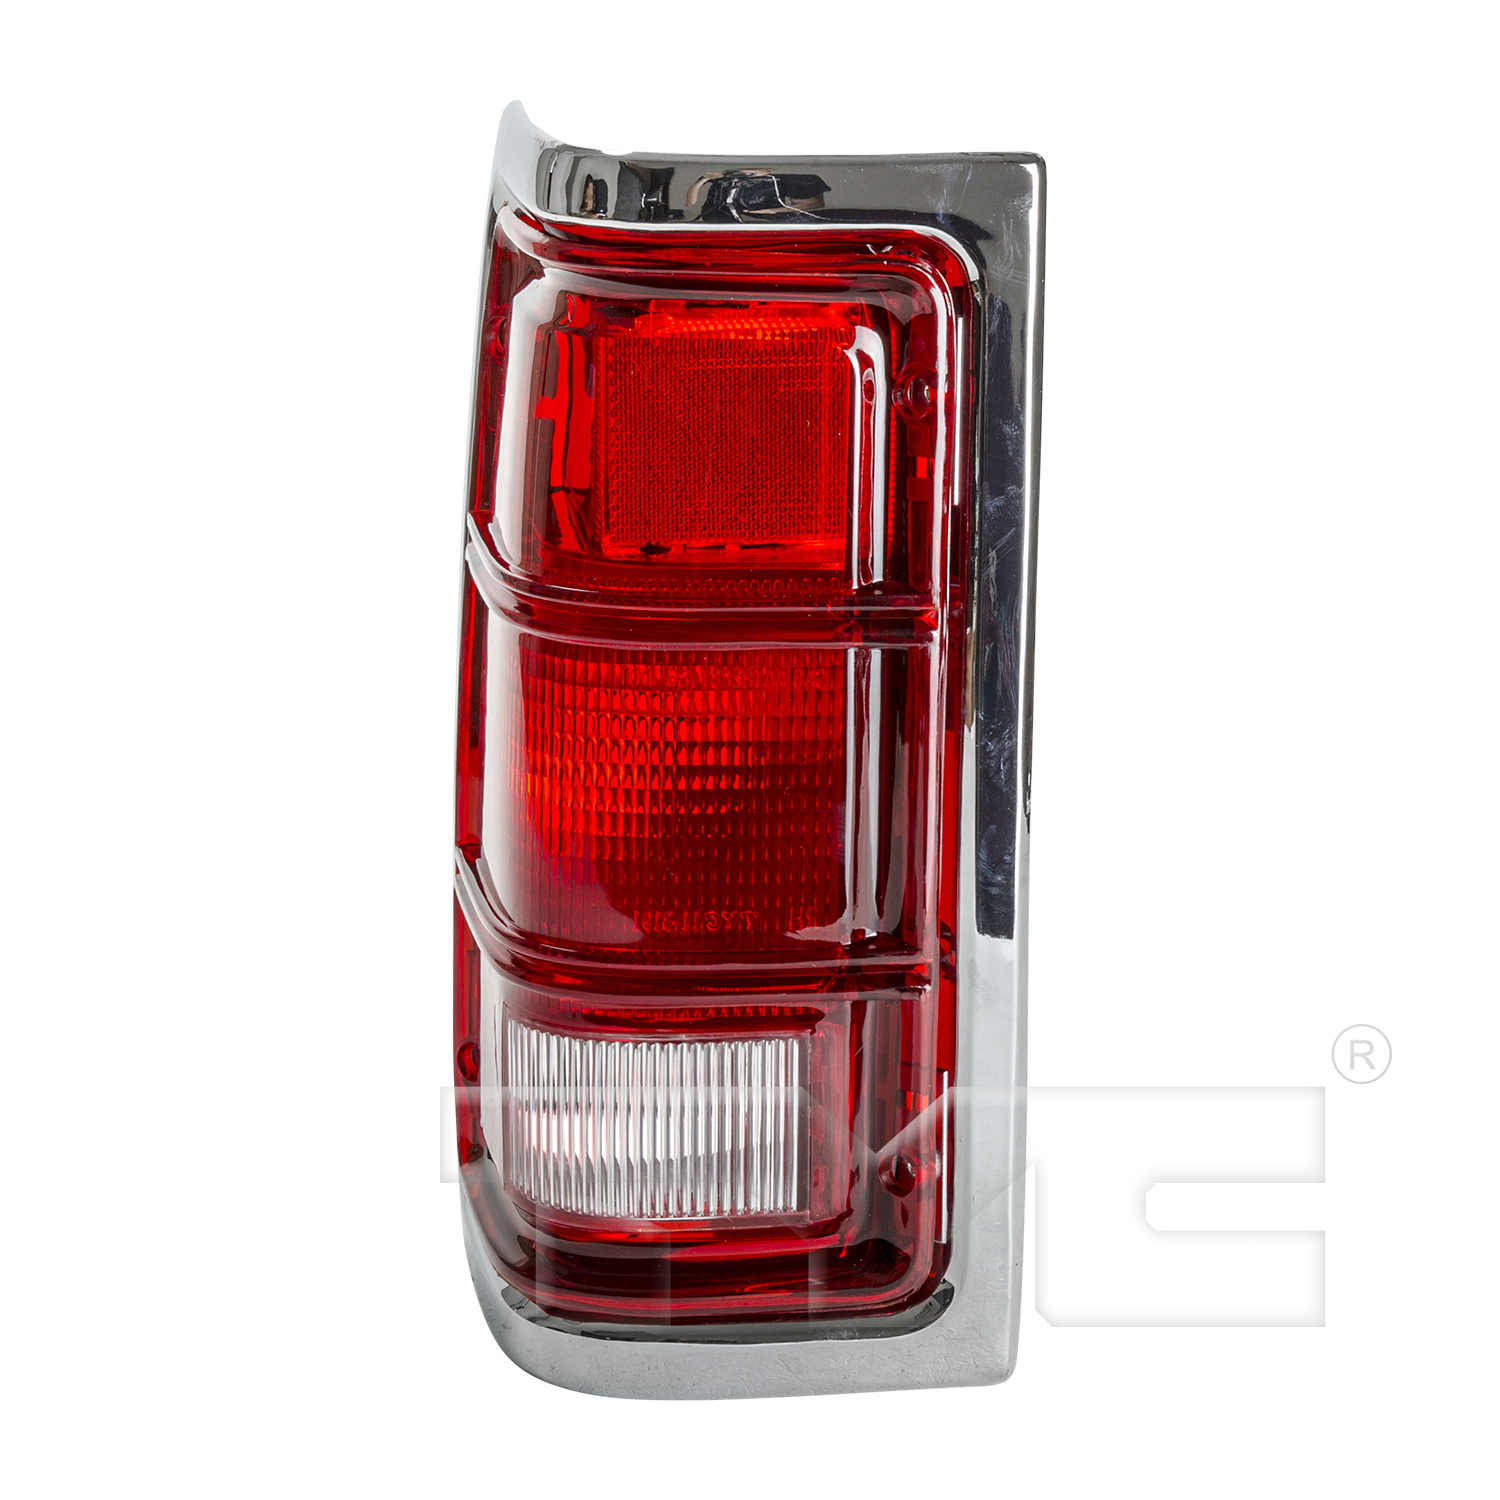 Aftermarket TAILLIGHTS for DODGE - W350, W350,92-93,LT Taillamp lens